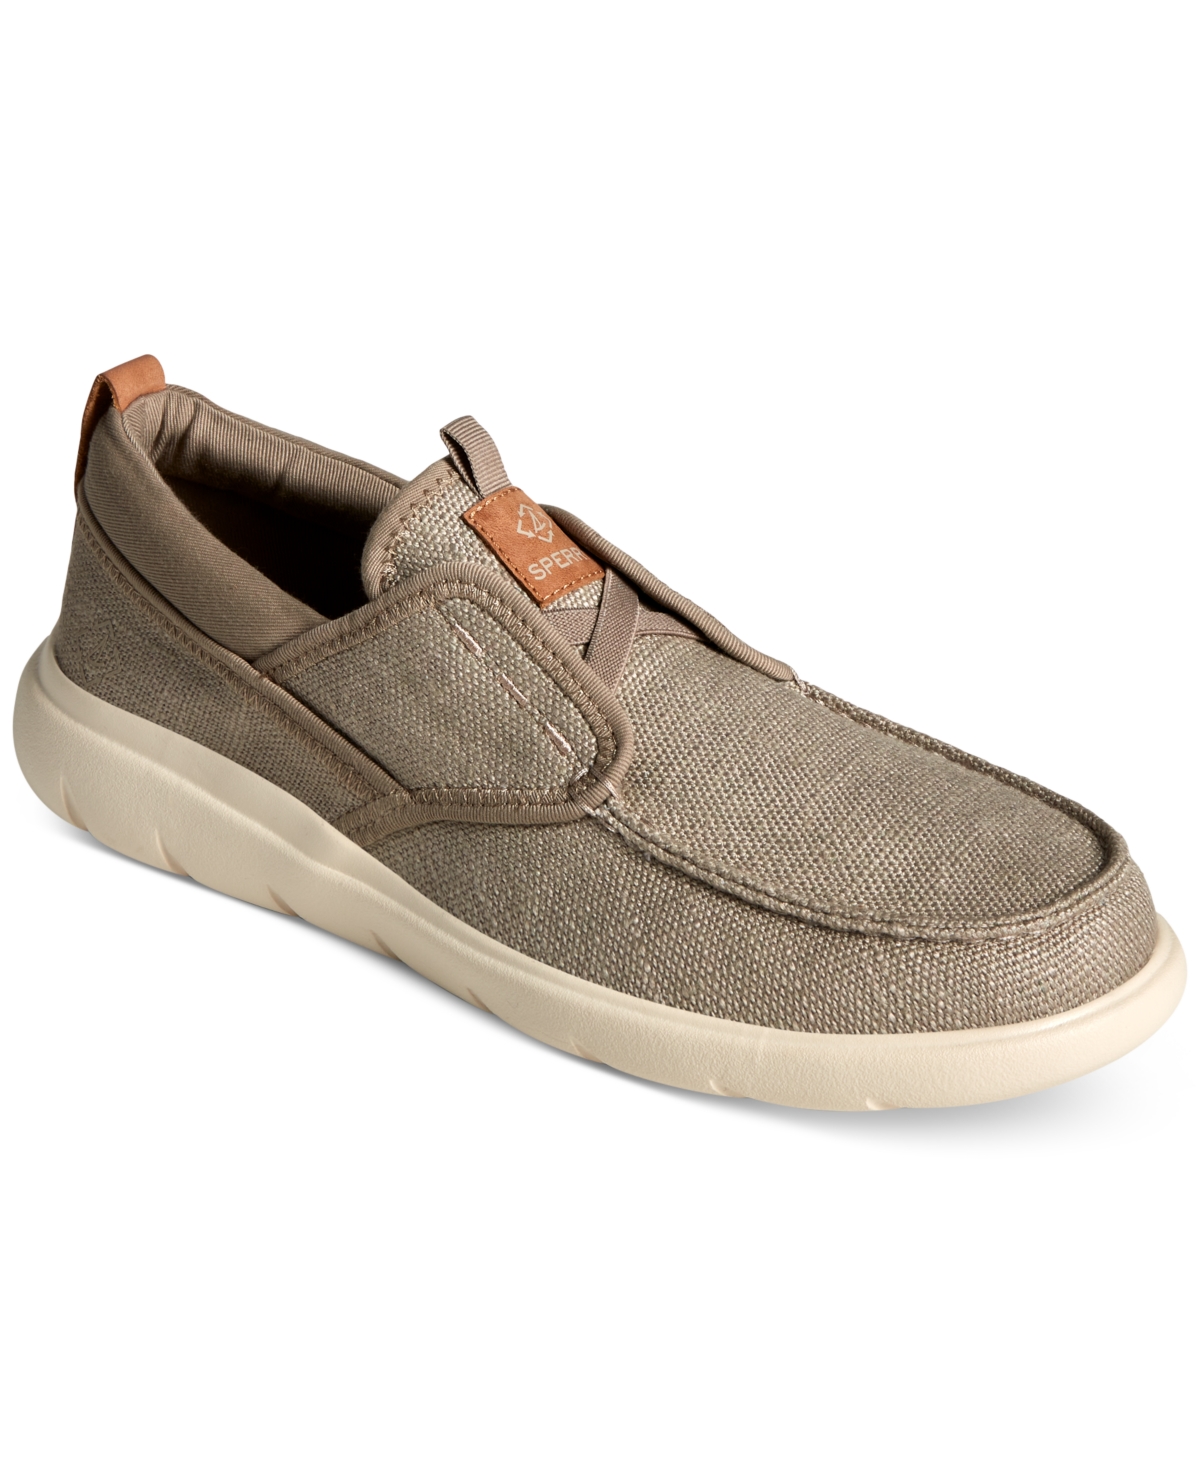 Sperry Men's Seacycled Captain's Moc Baja Boat Shoes Men's Shoes In ...